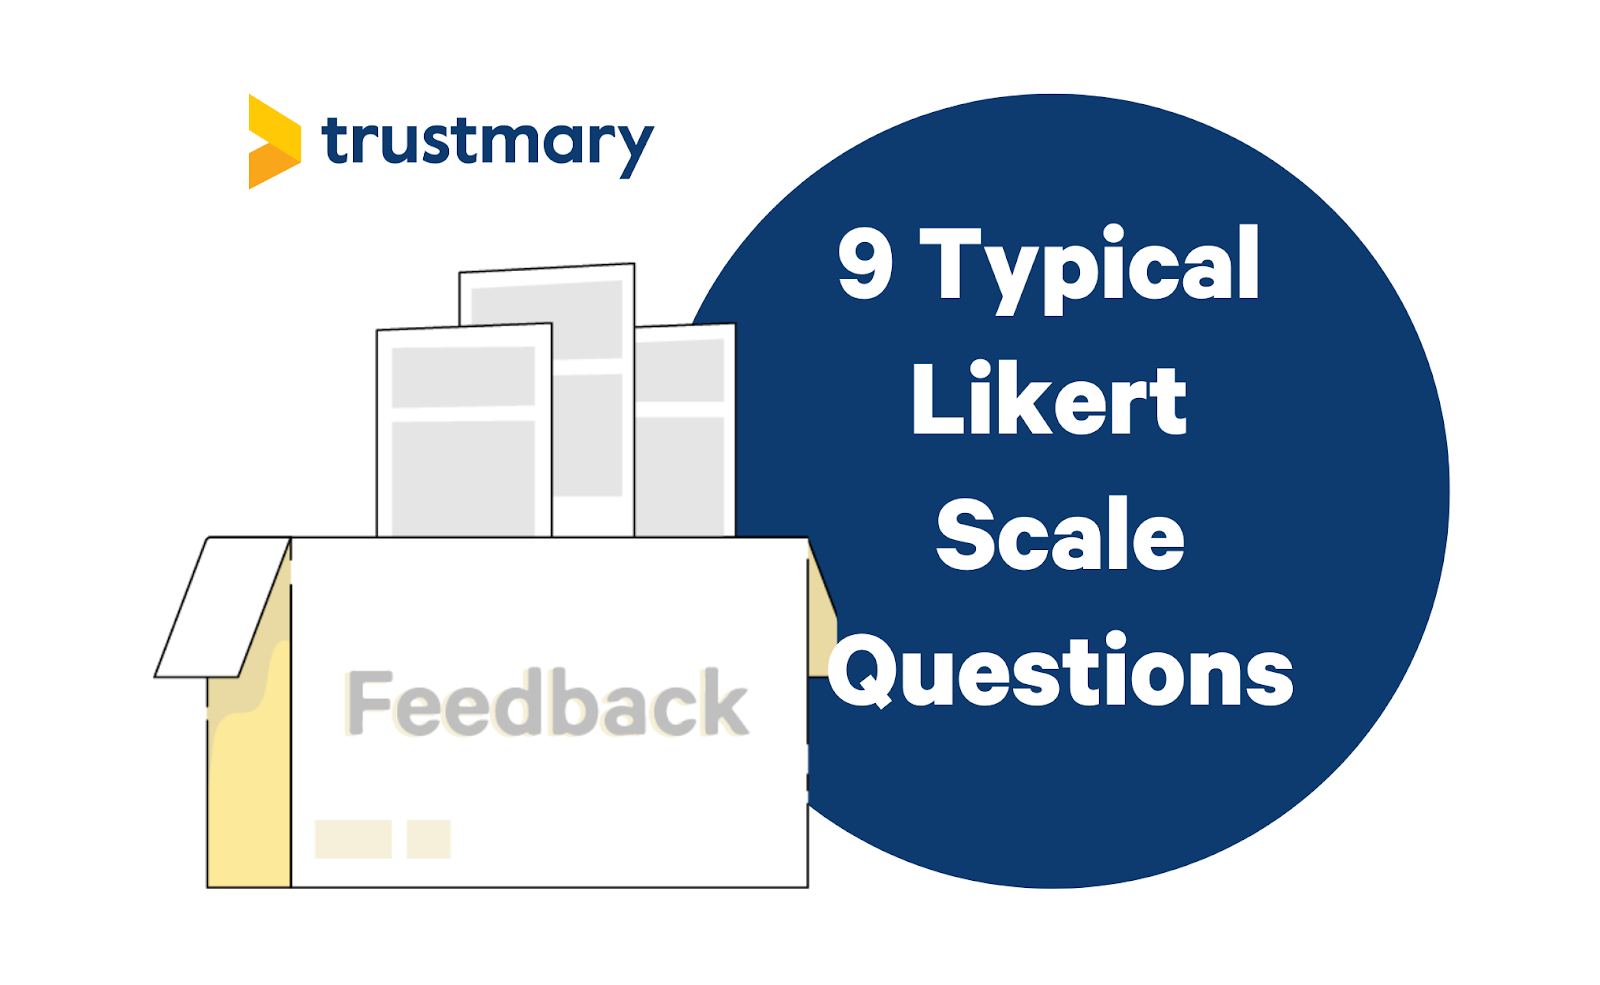 9 typical likert scale questions